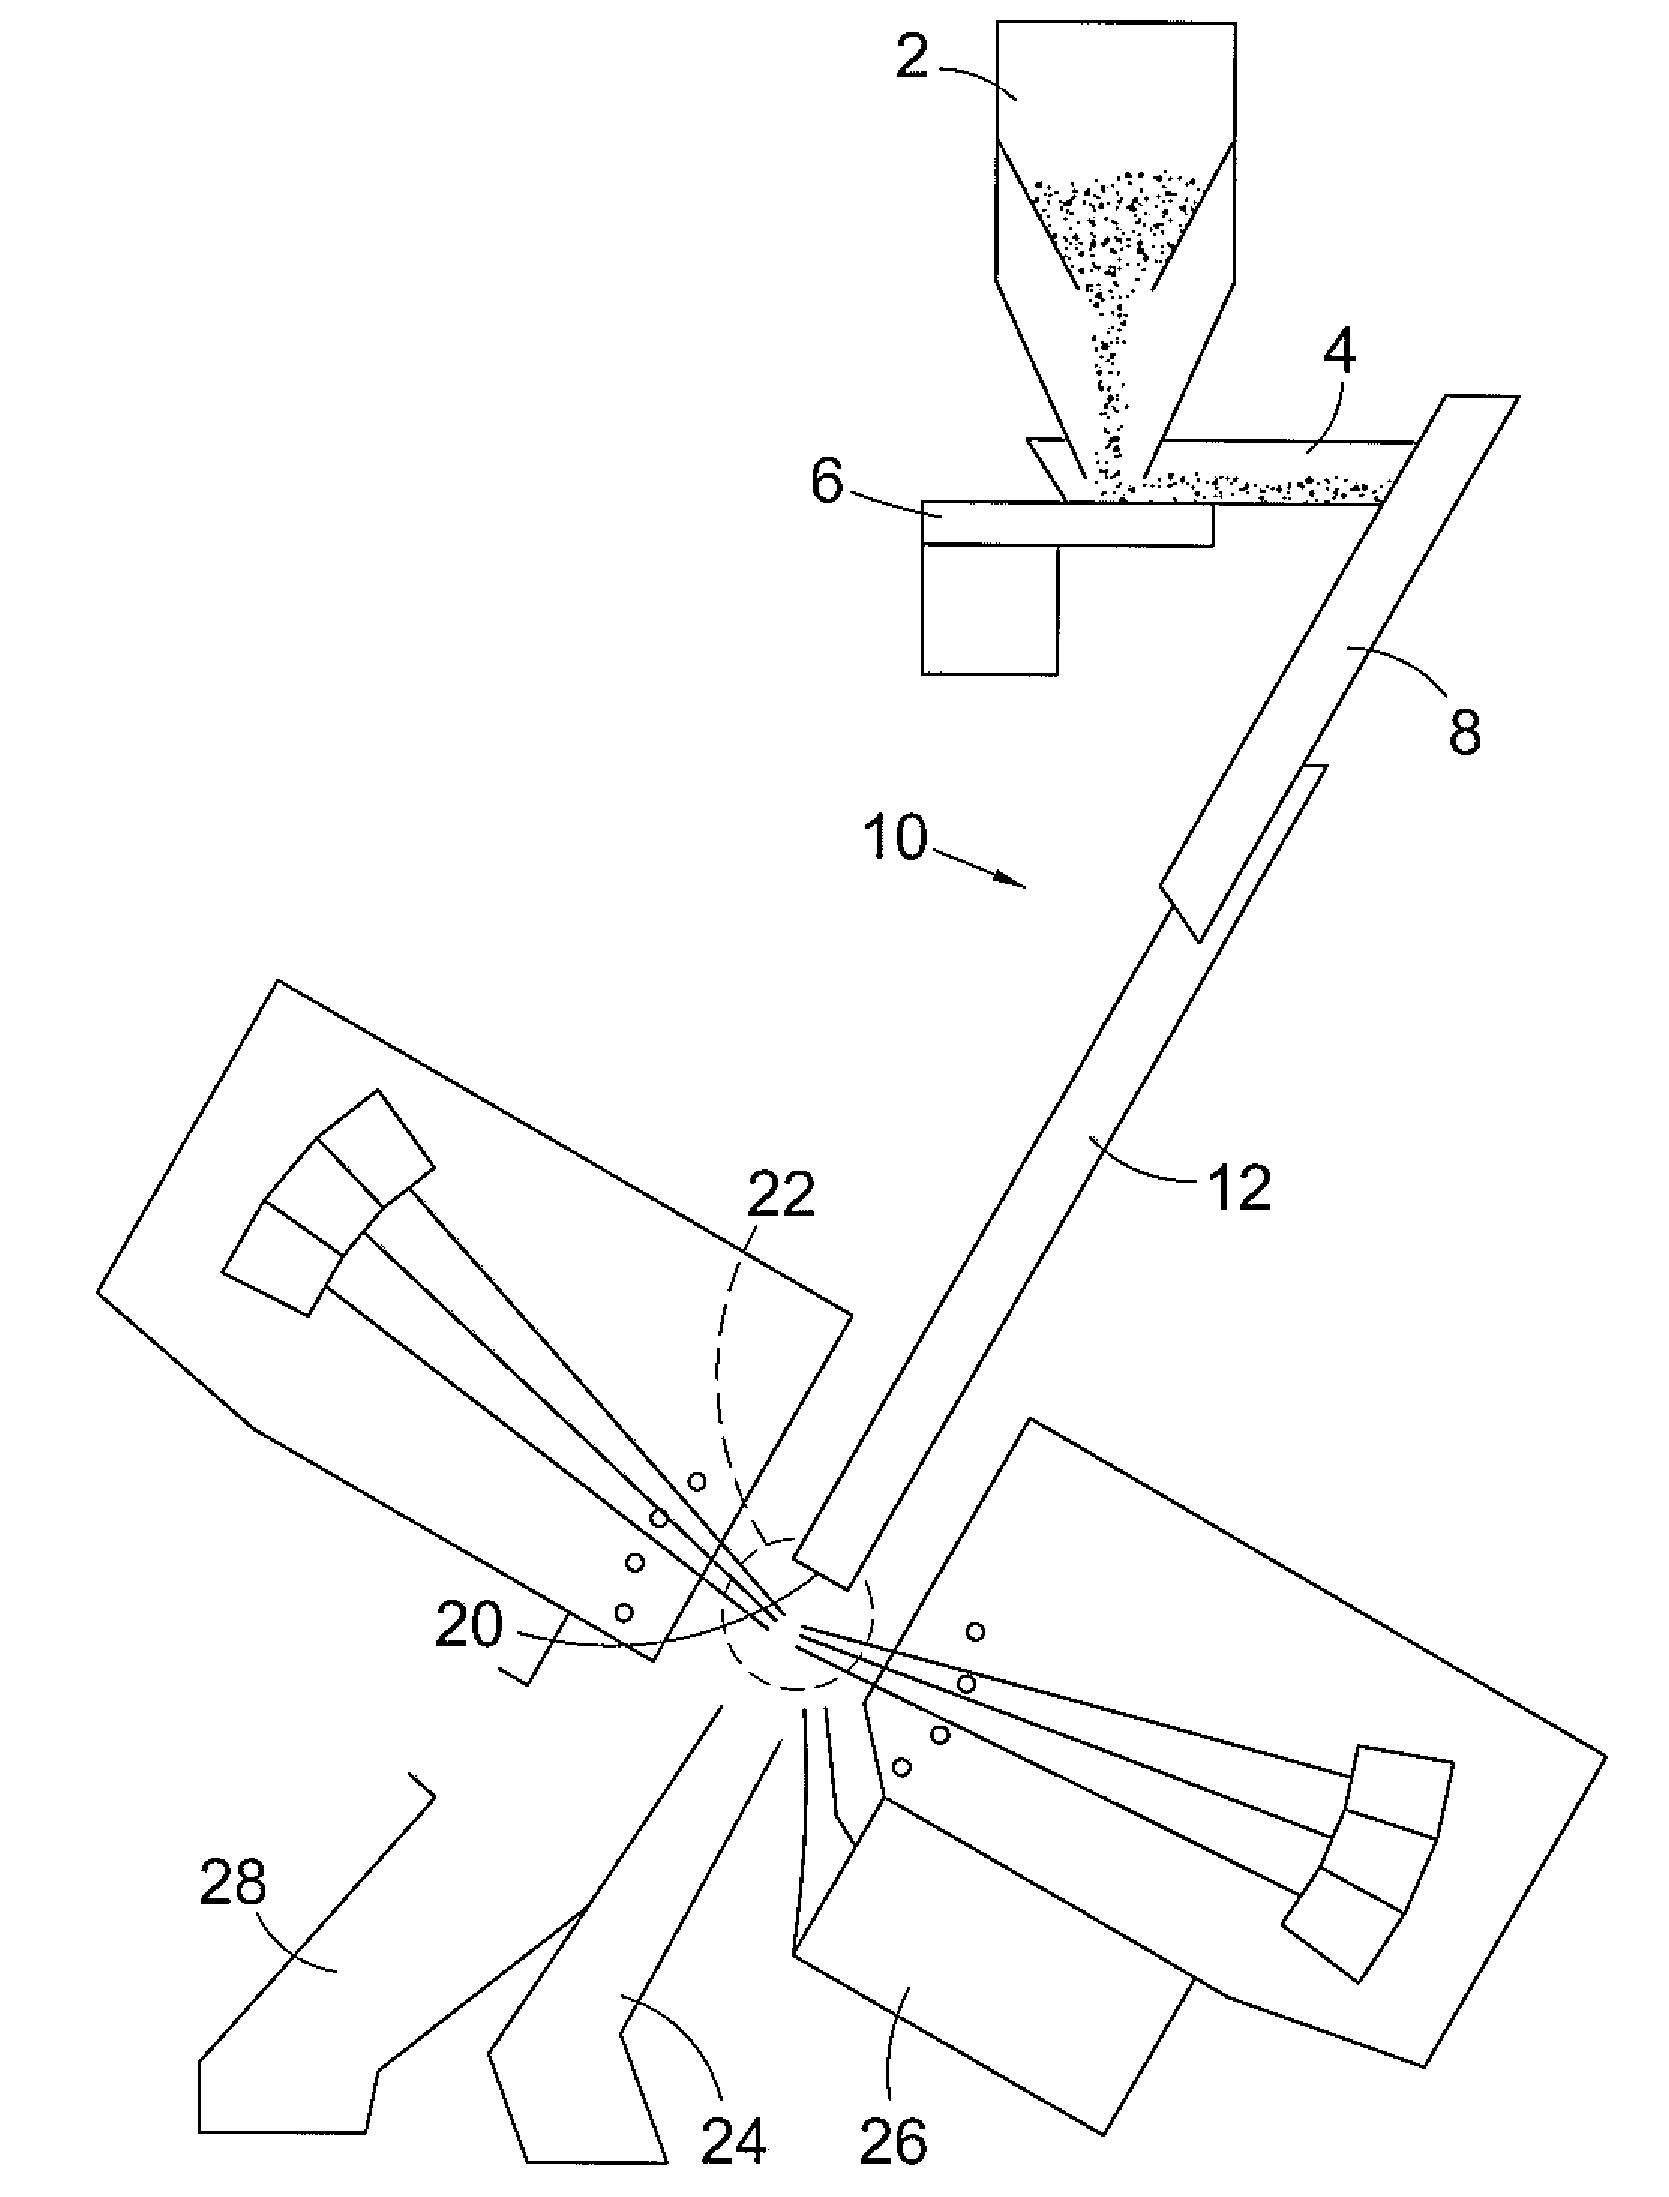 Chutes for Sorting and Inspection Apparatus